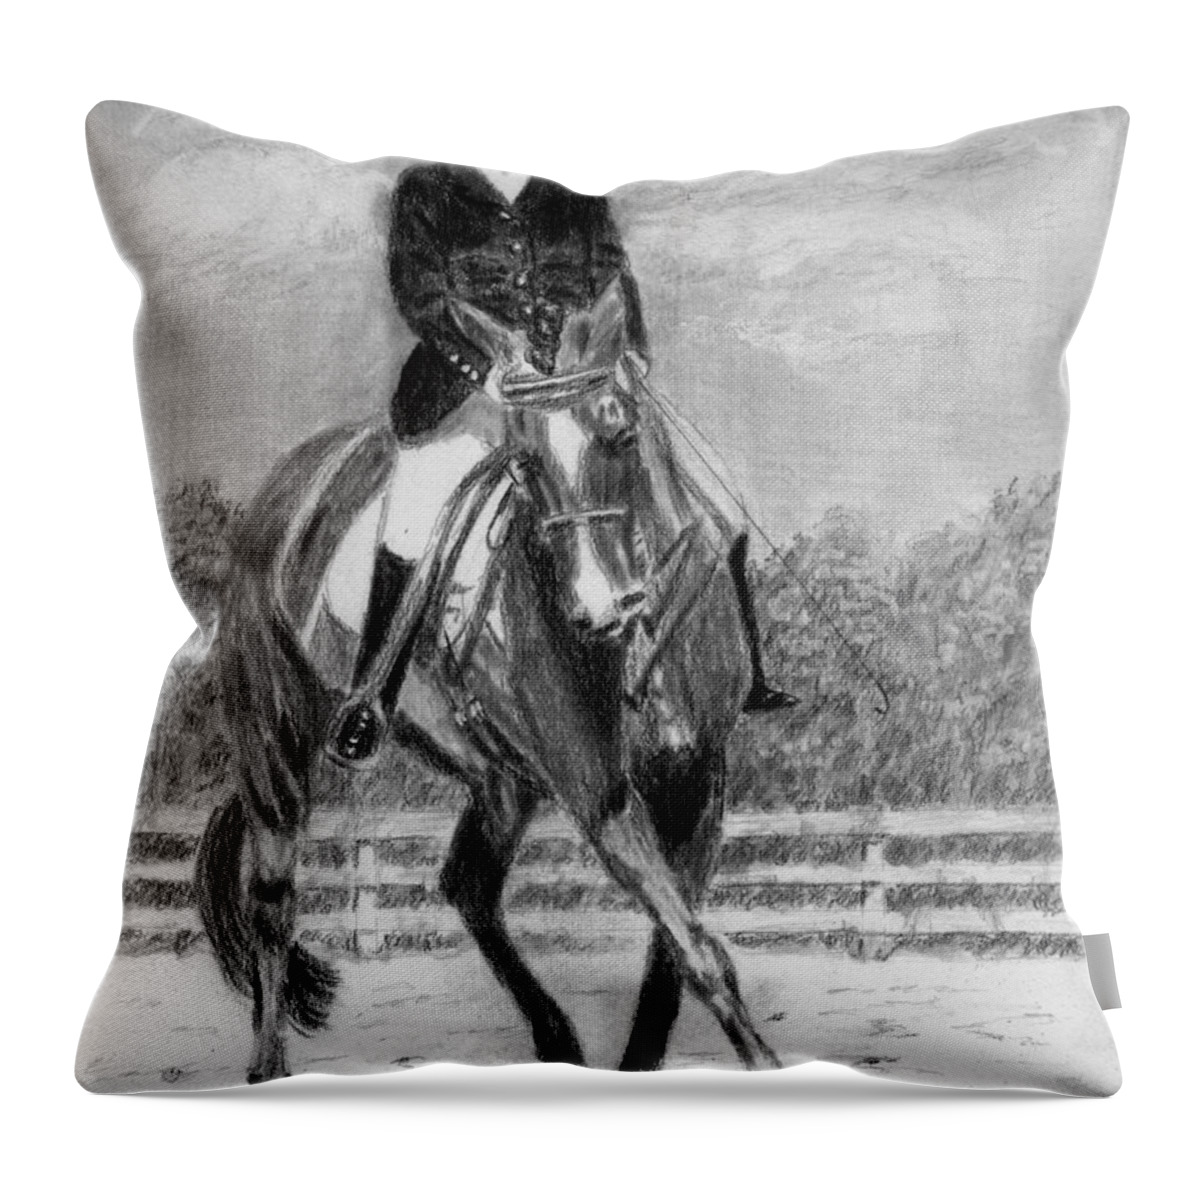 Woman Throw Pillow featuring the drawing The Dance by Quwatha Valentine